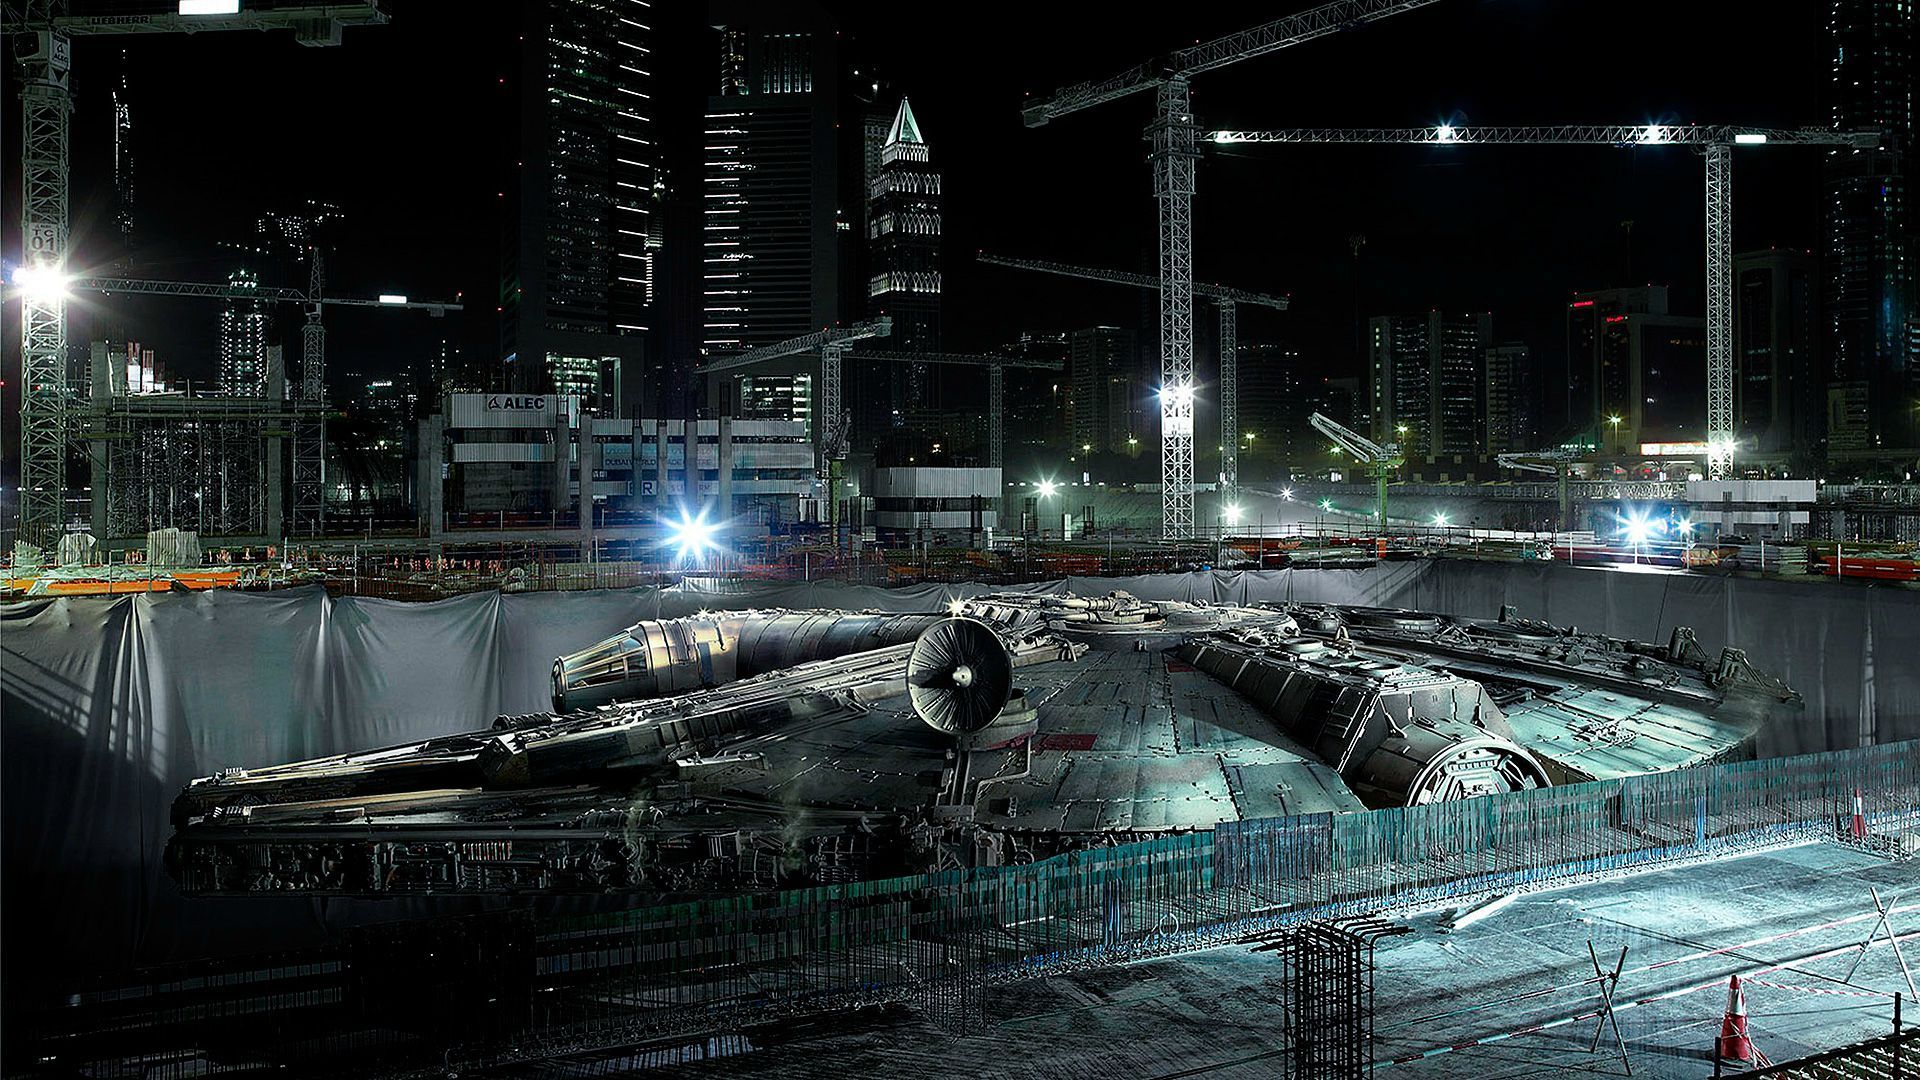 37 Millennium Falcon HD Wallpapers | Backgrounds - Wallpaper Abyss